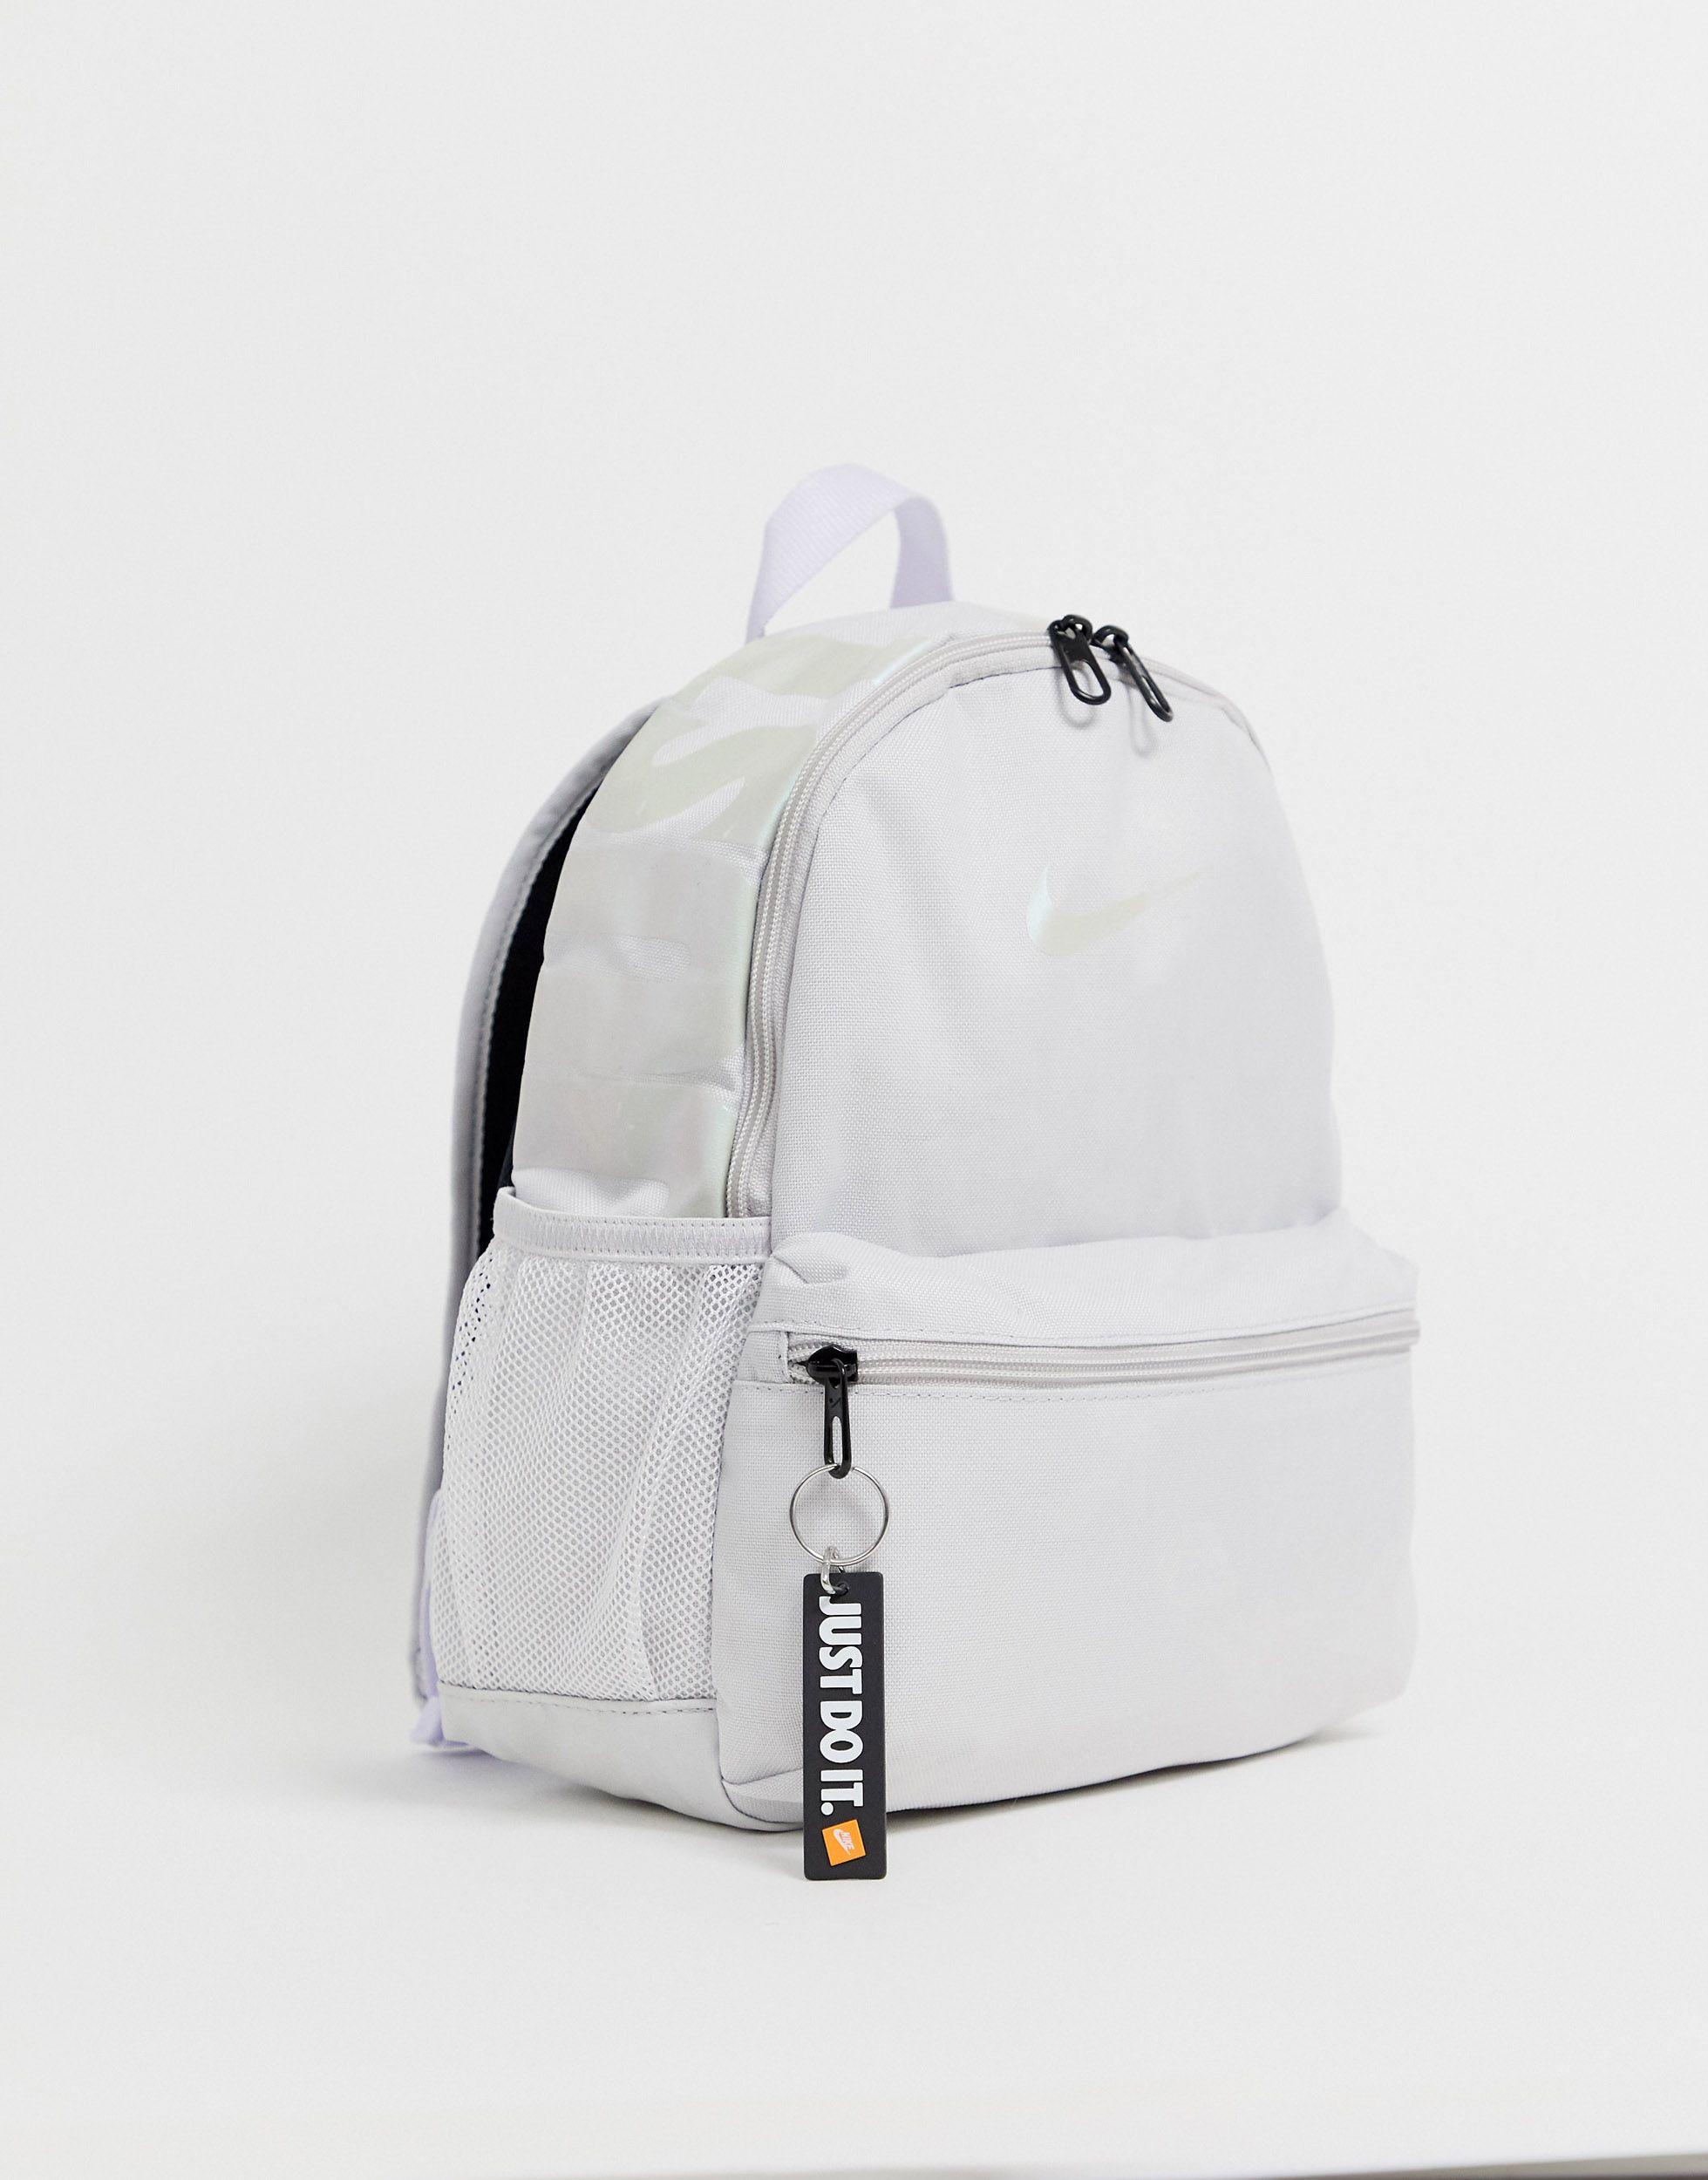 Nike Canvas Gray And Iridescent Just Do It Mini Backpack - Lyst